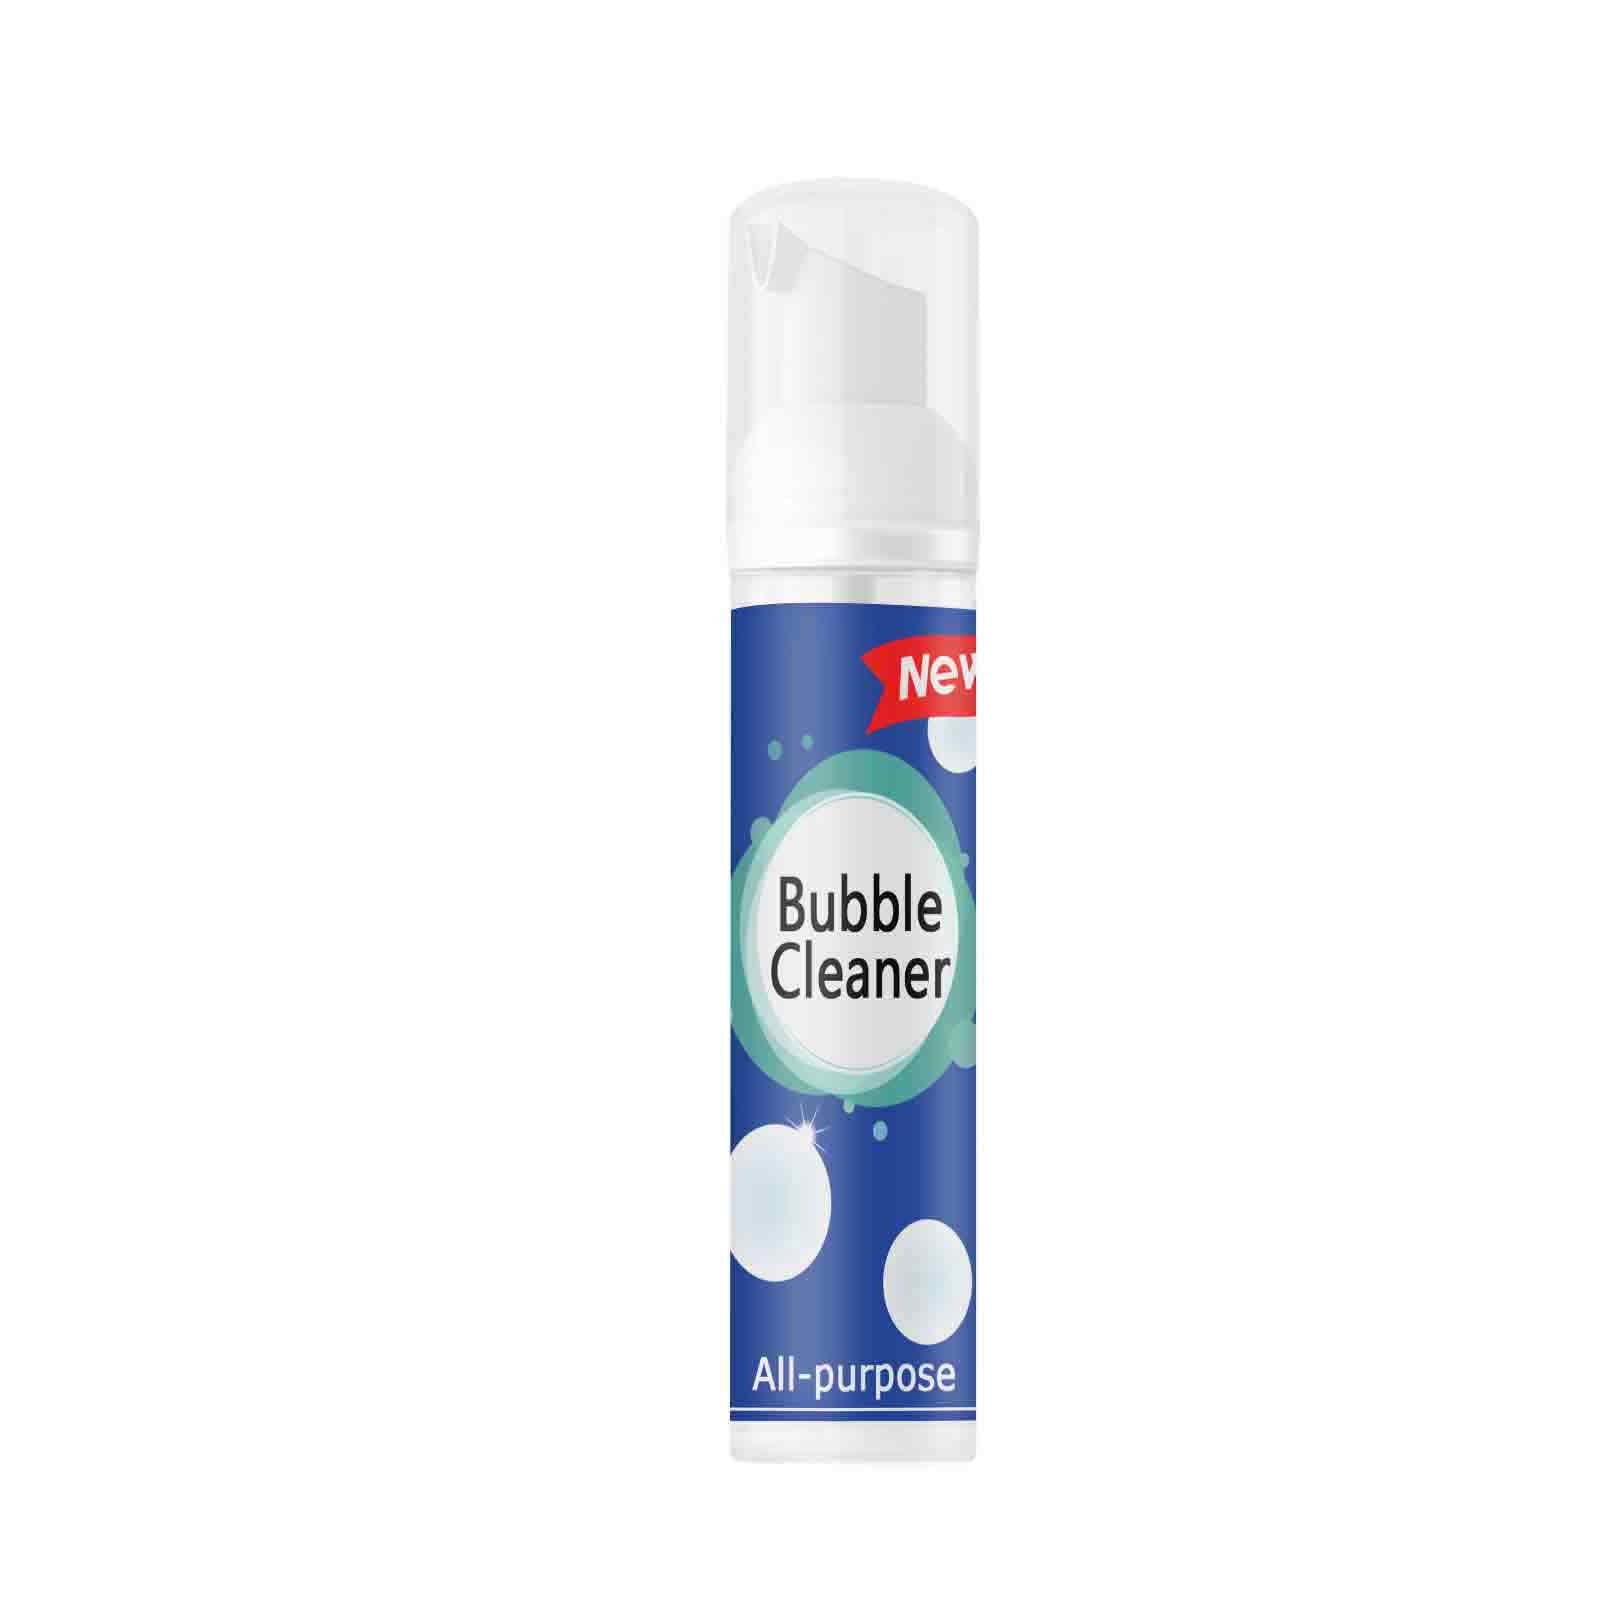 Bubble Cleaner® foam cleaner – My Residence Design